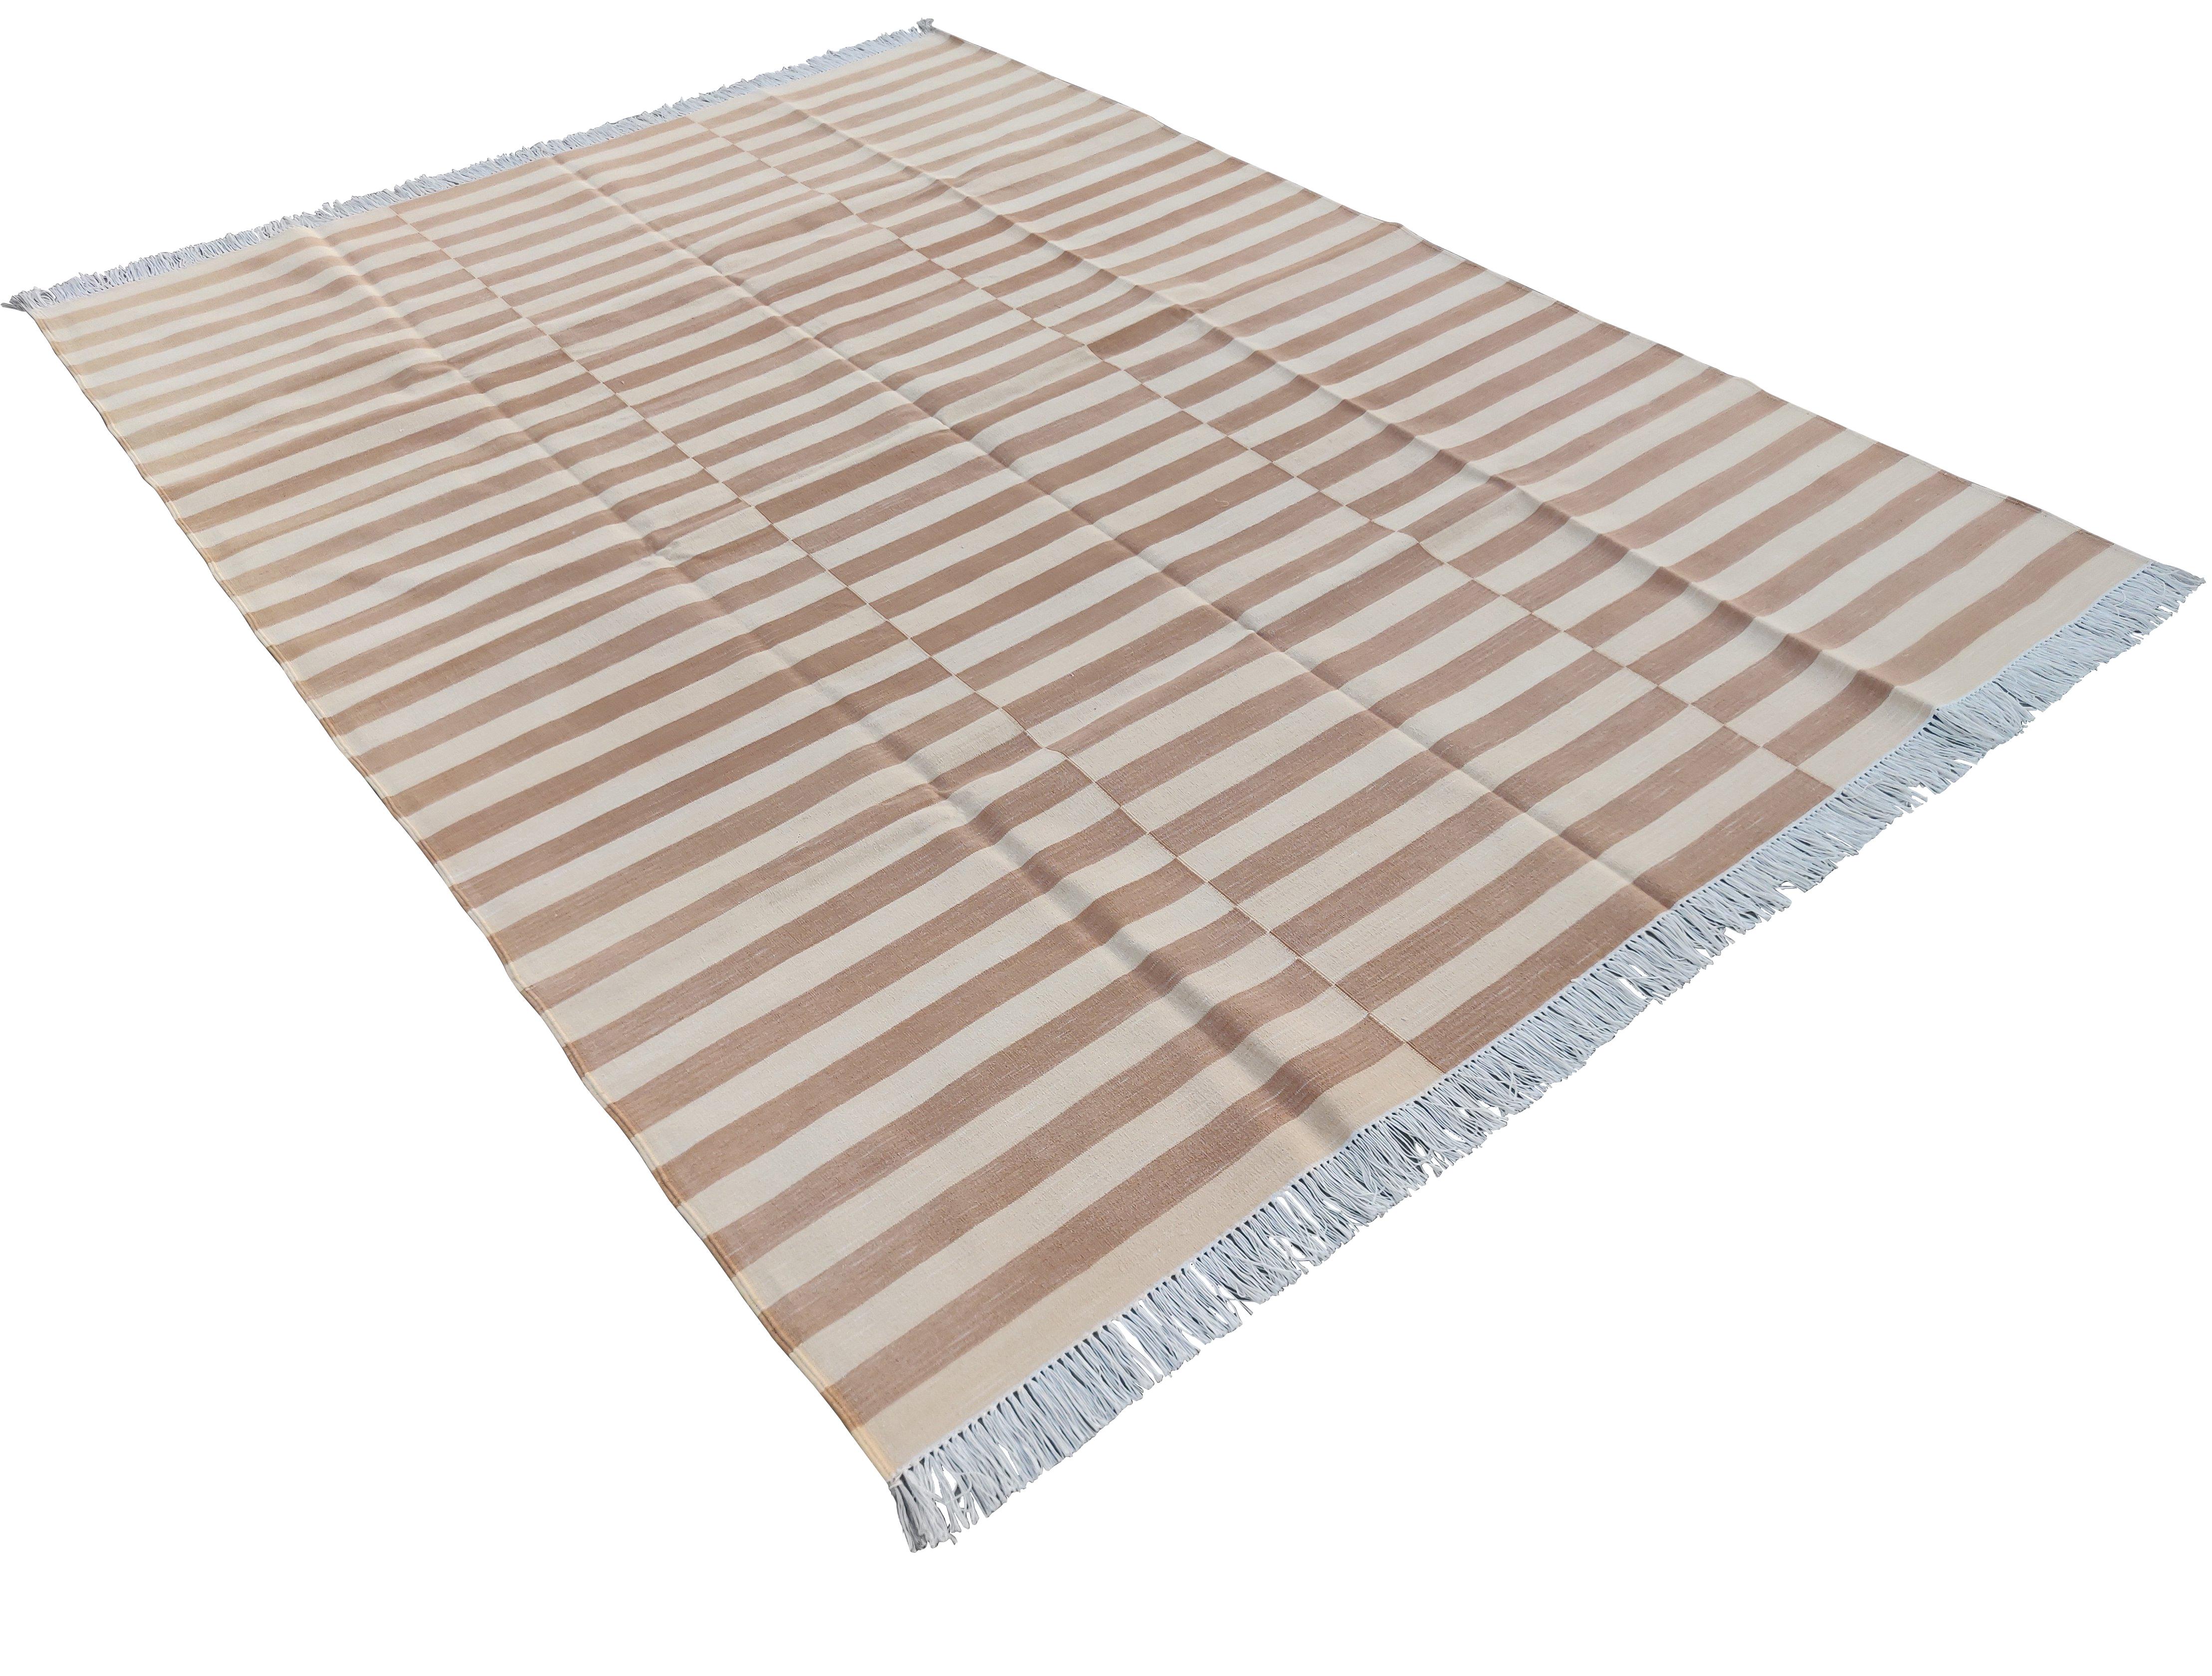 Cotton Vegetable Dyed Tan and Cream Striped Indian Dhurrie Rug-6'x9' 

These special flat-weave dhurries are hand-woven with 15 ply 100% cotton yarn. Due to the special manufacturing techniques used to create our rugs, the size and color of each